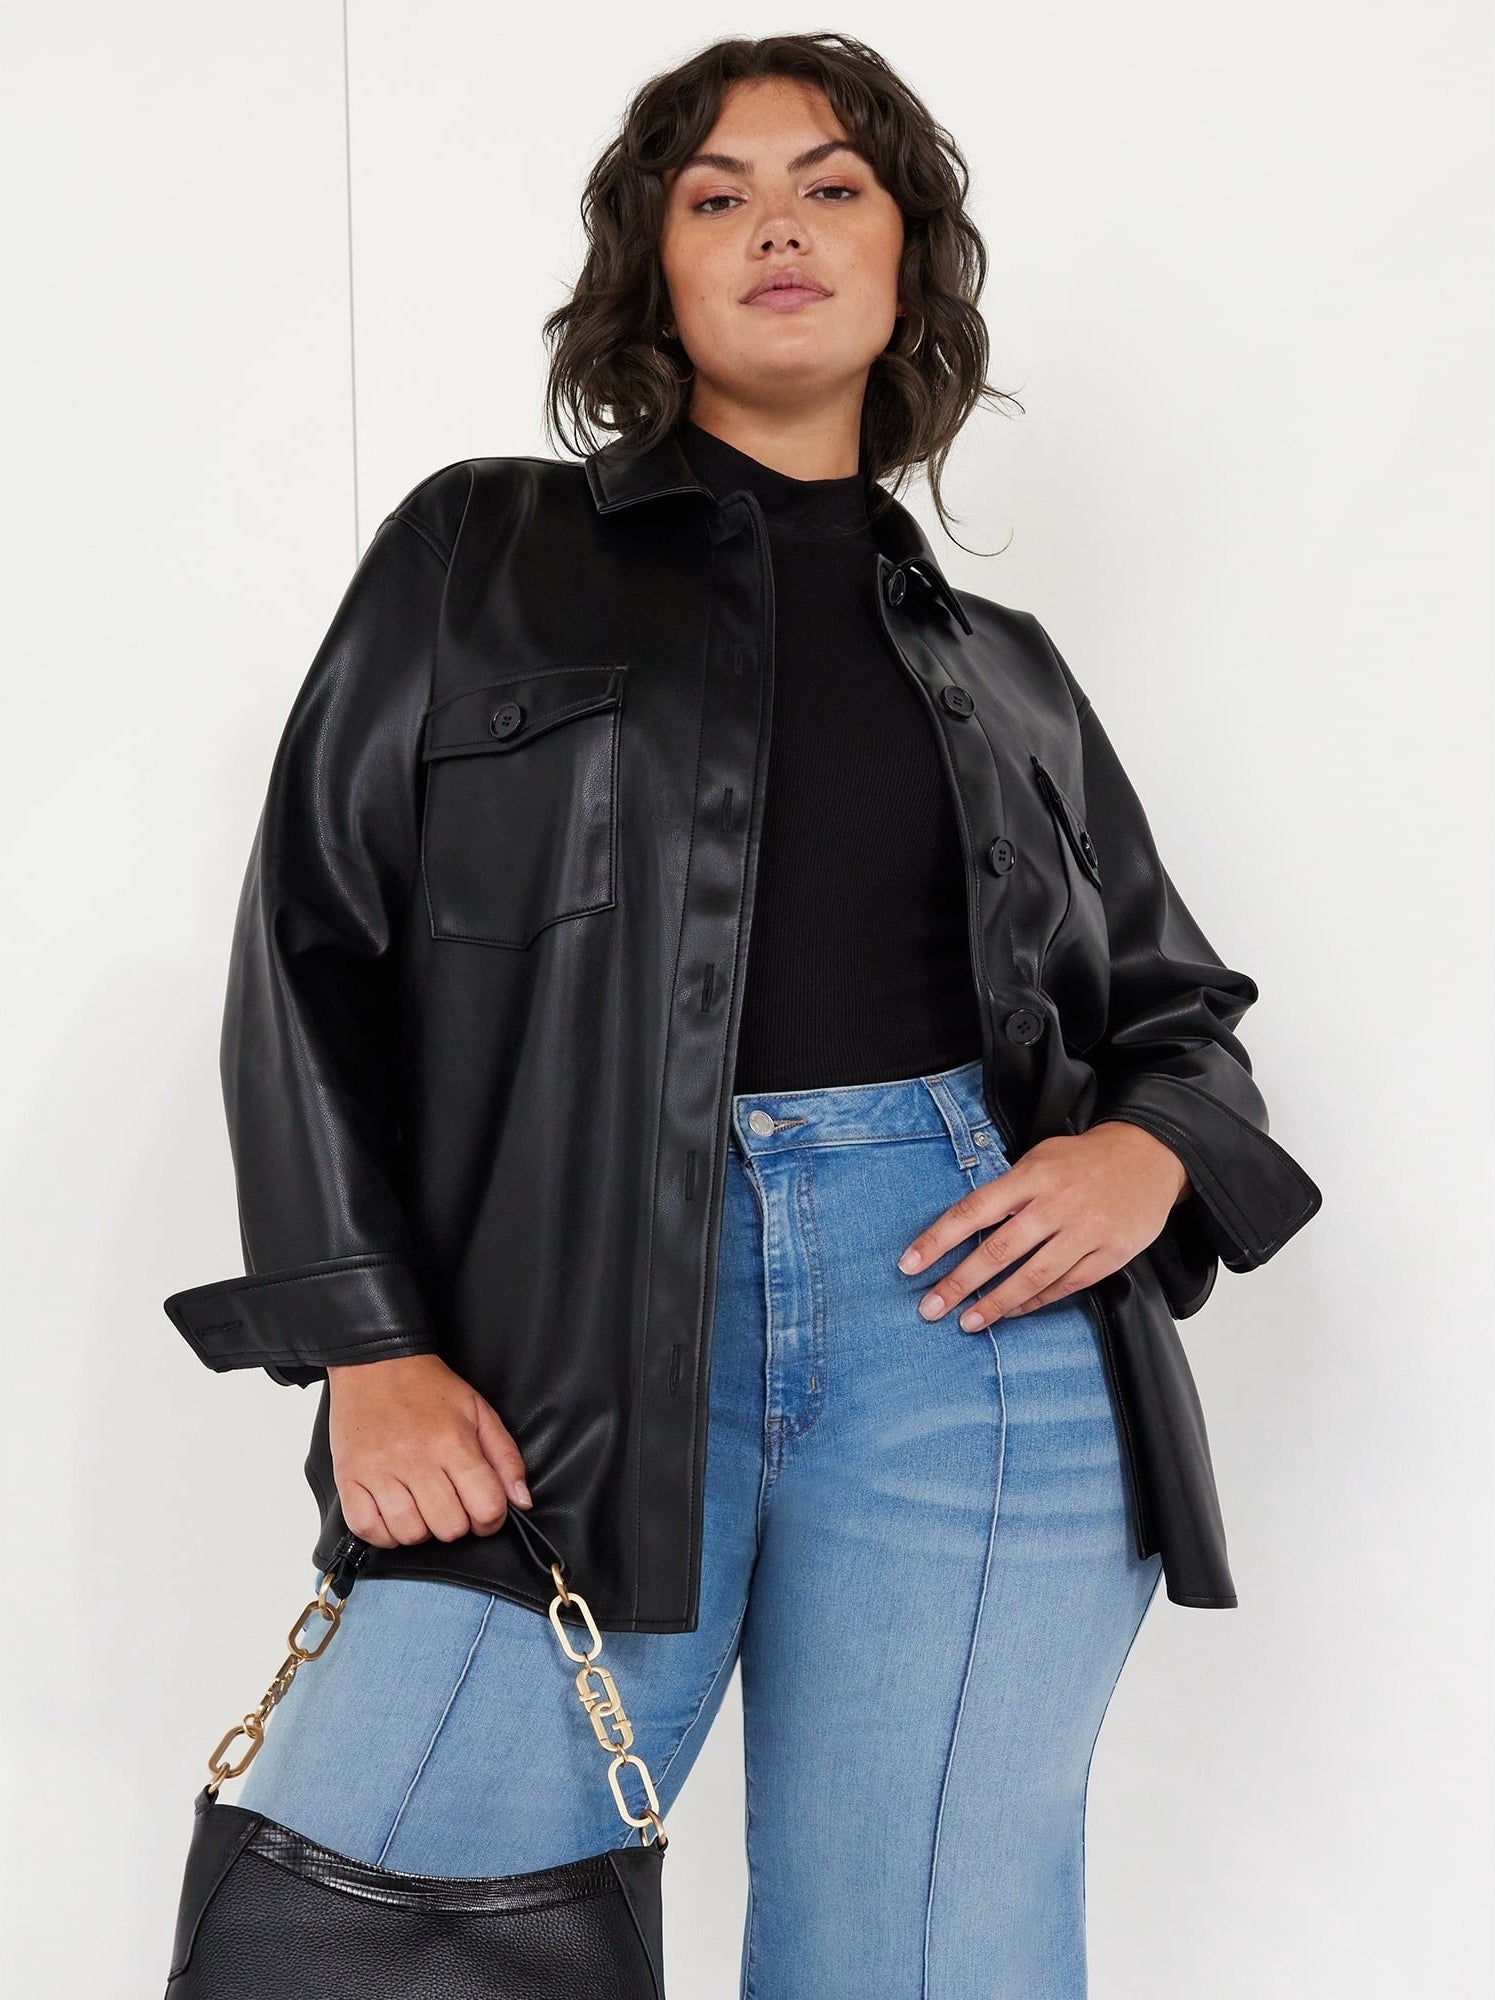 Model wearing a black pleather jacket, jeans, and black purse.